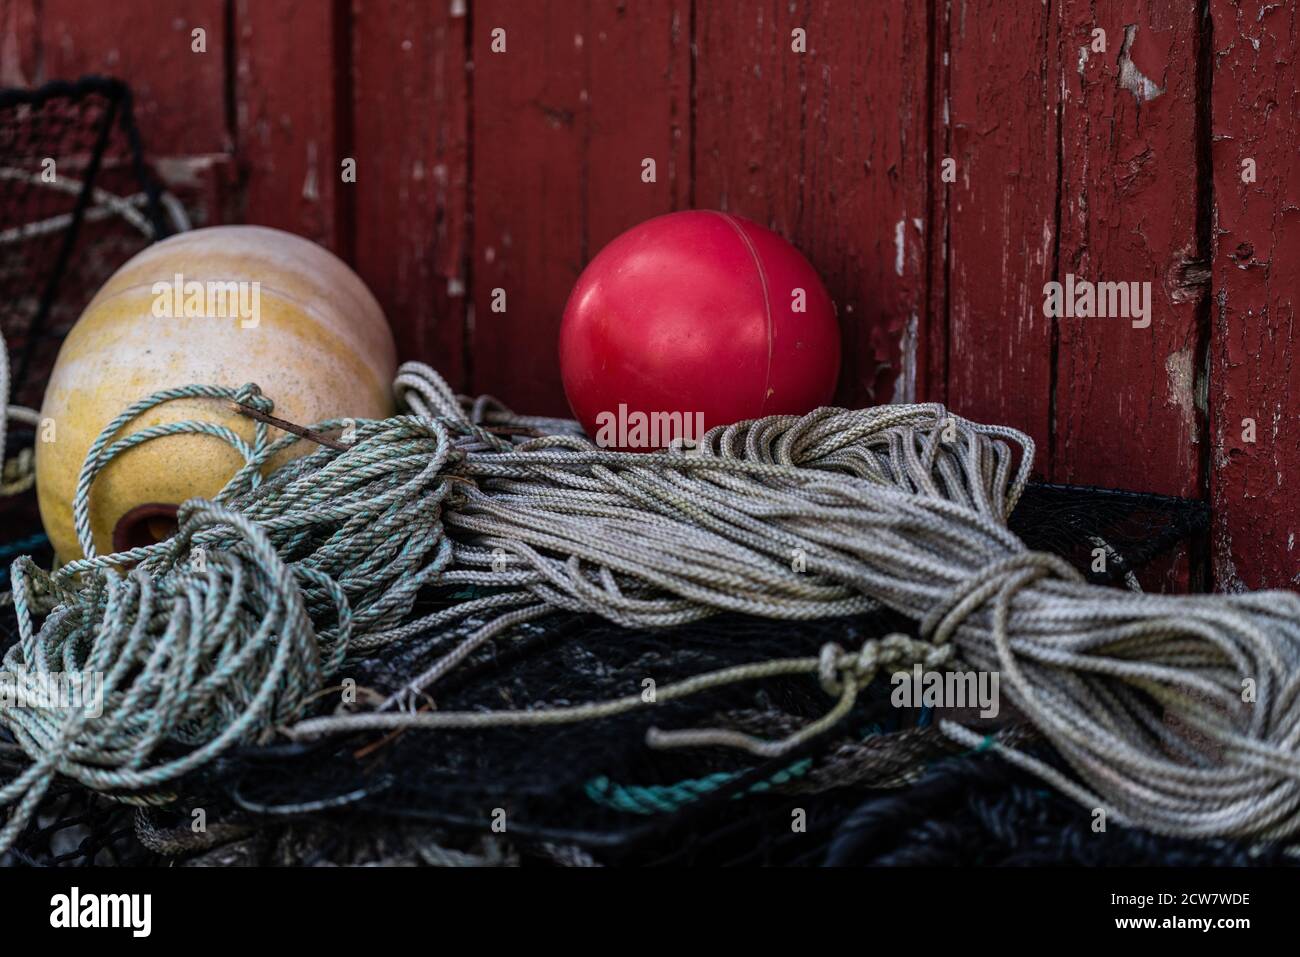 Crab and lobster gear, buoys and ropes against an old red wall where the paint is cracking Stock Photo